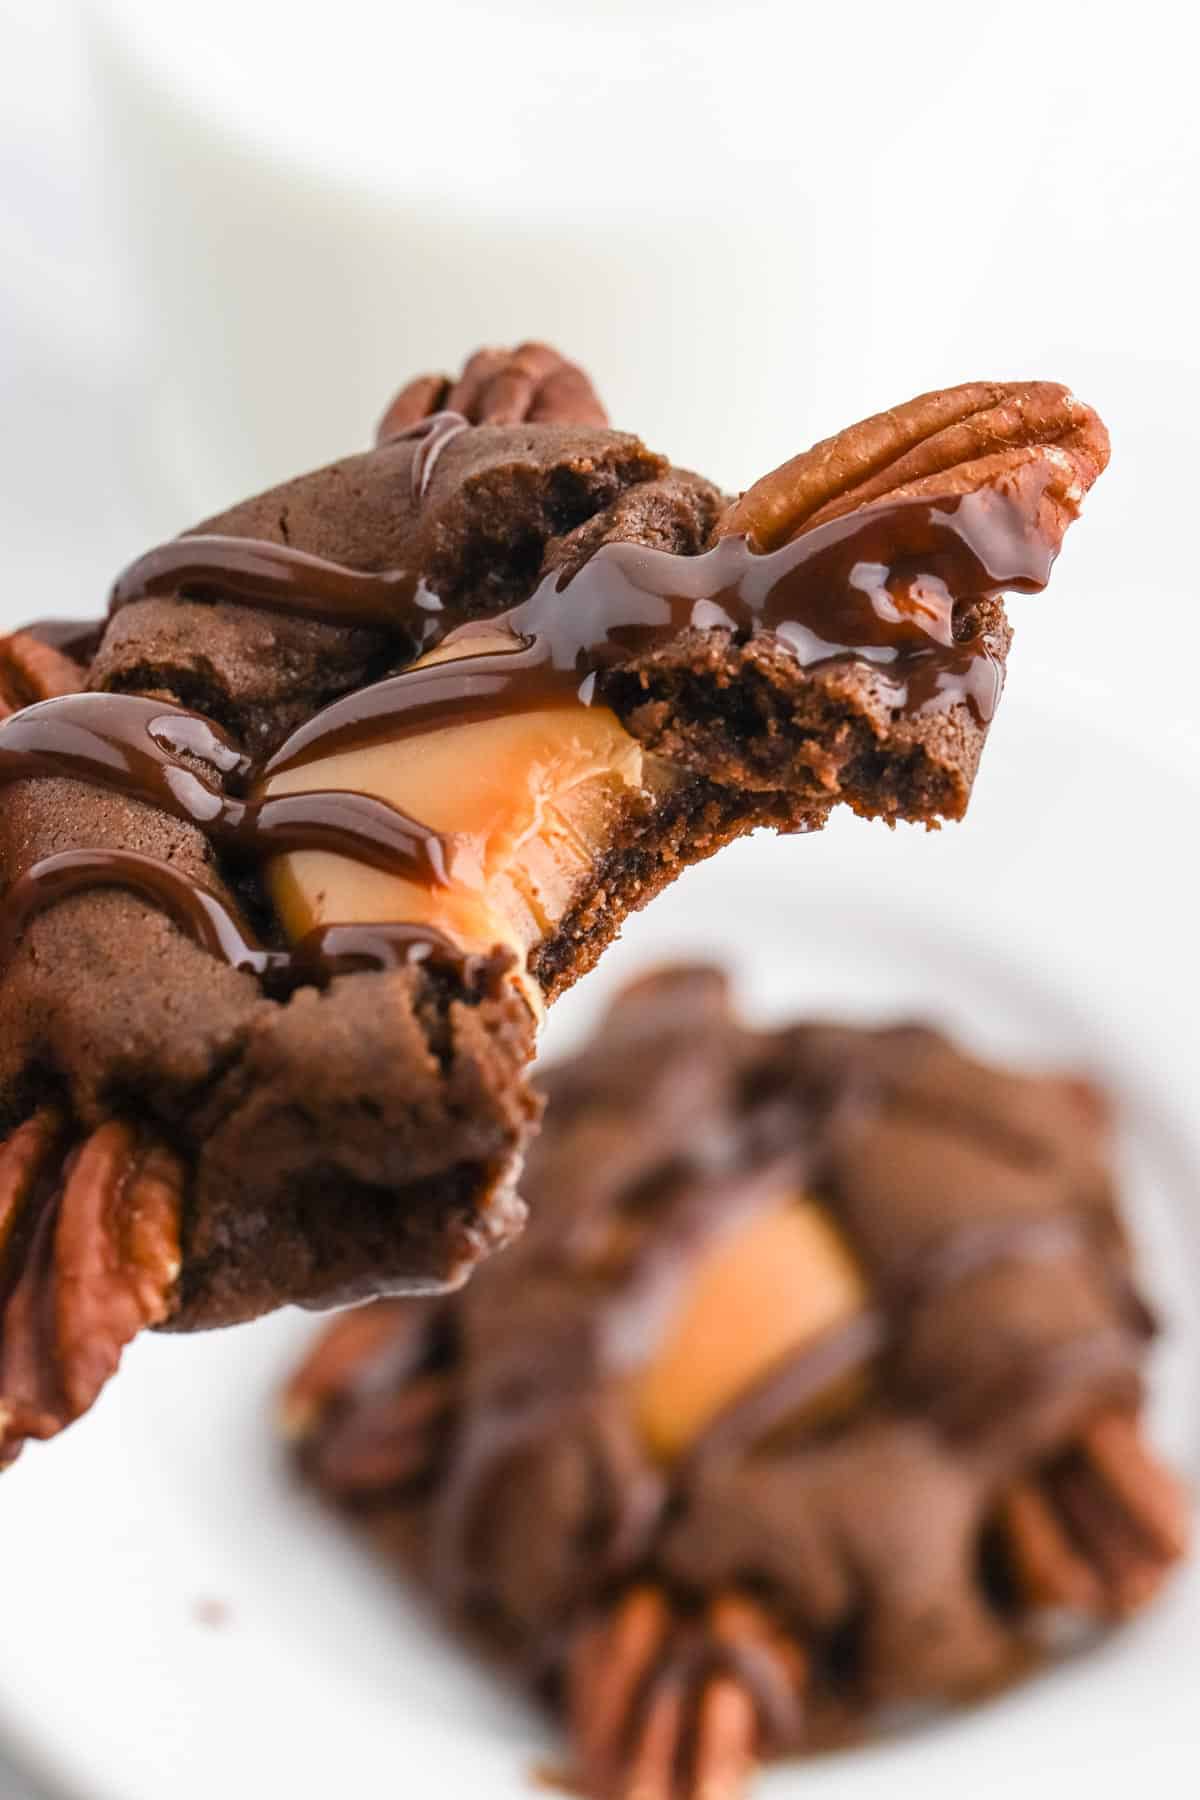 A chocolate turtle cookie up over the plate of more cookies with a bite missing to show caramel inside.